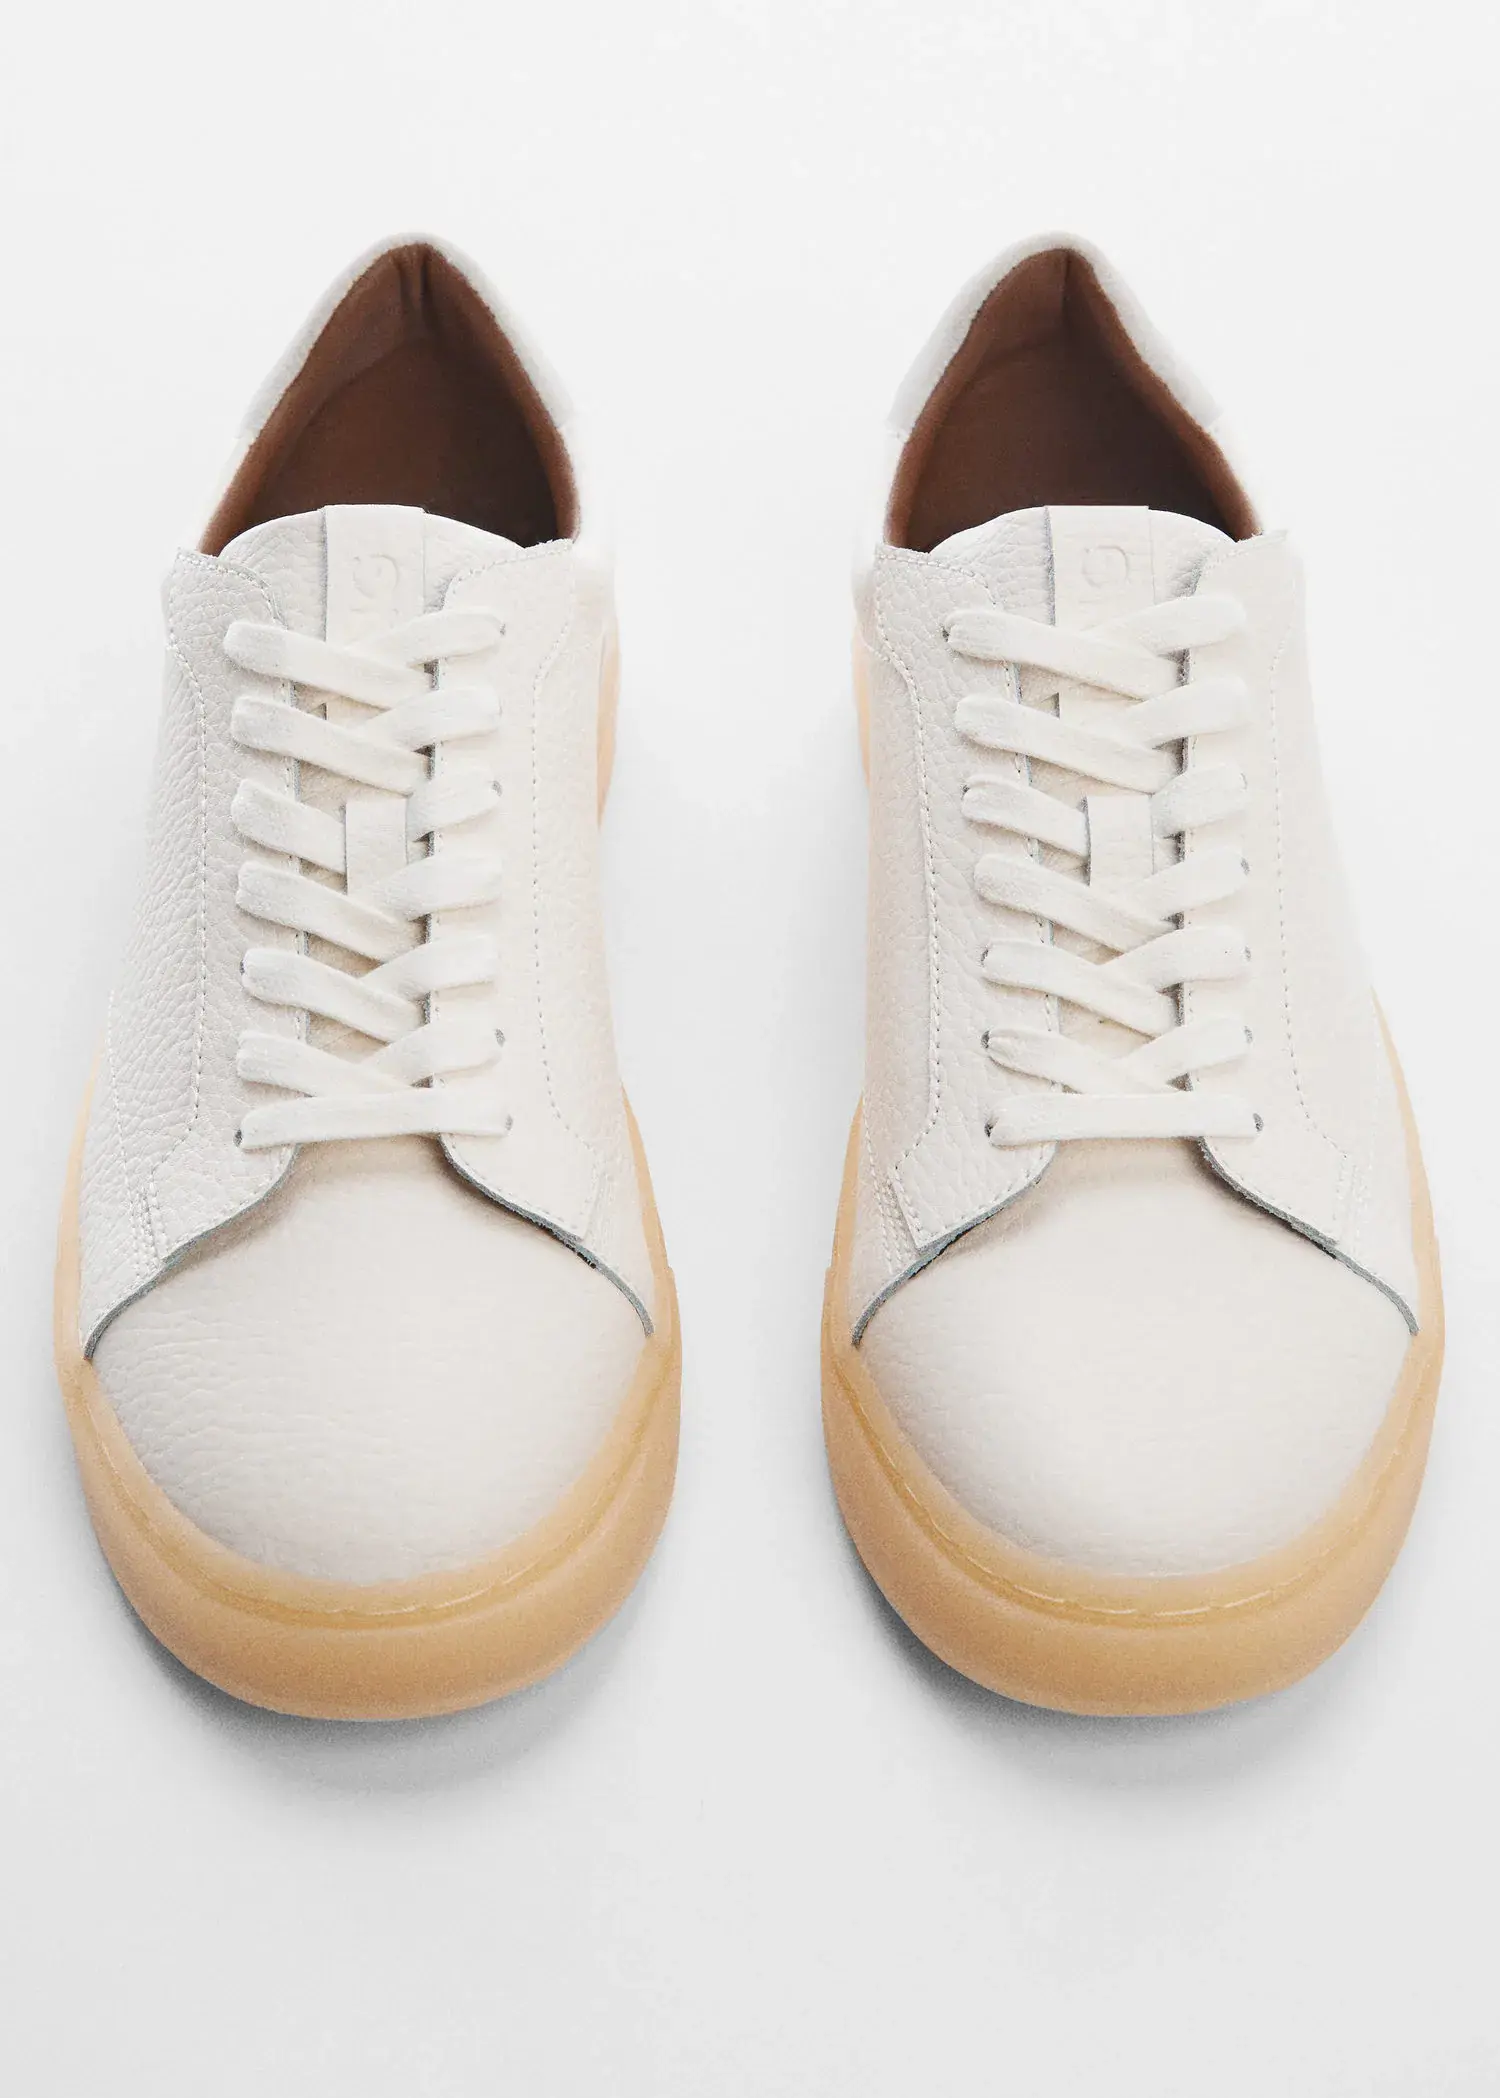 Mango Nappa leather trainers. a pair of white sneakers with a wooden bottom. 